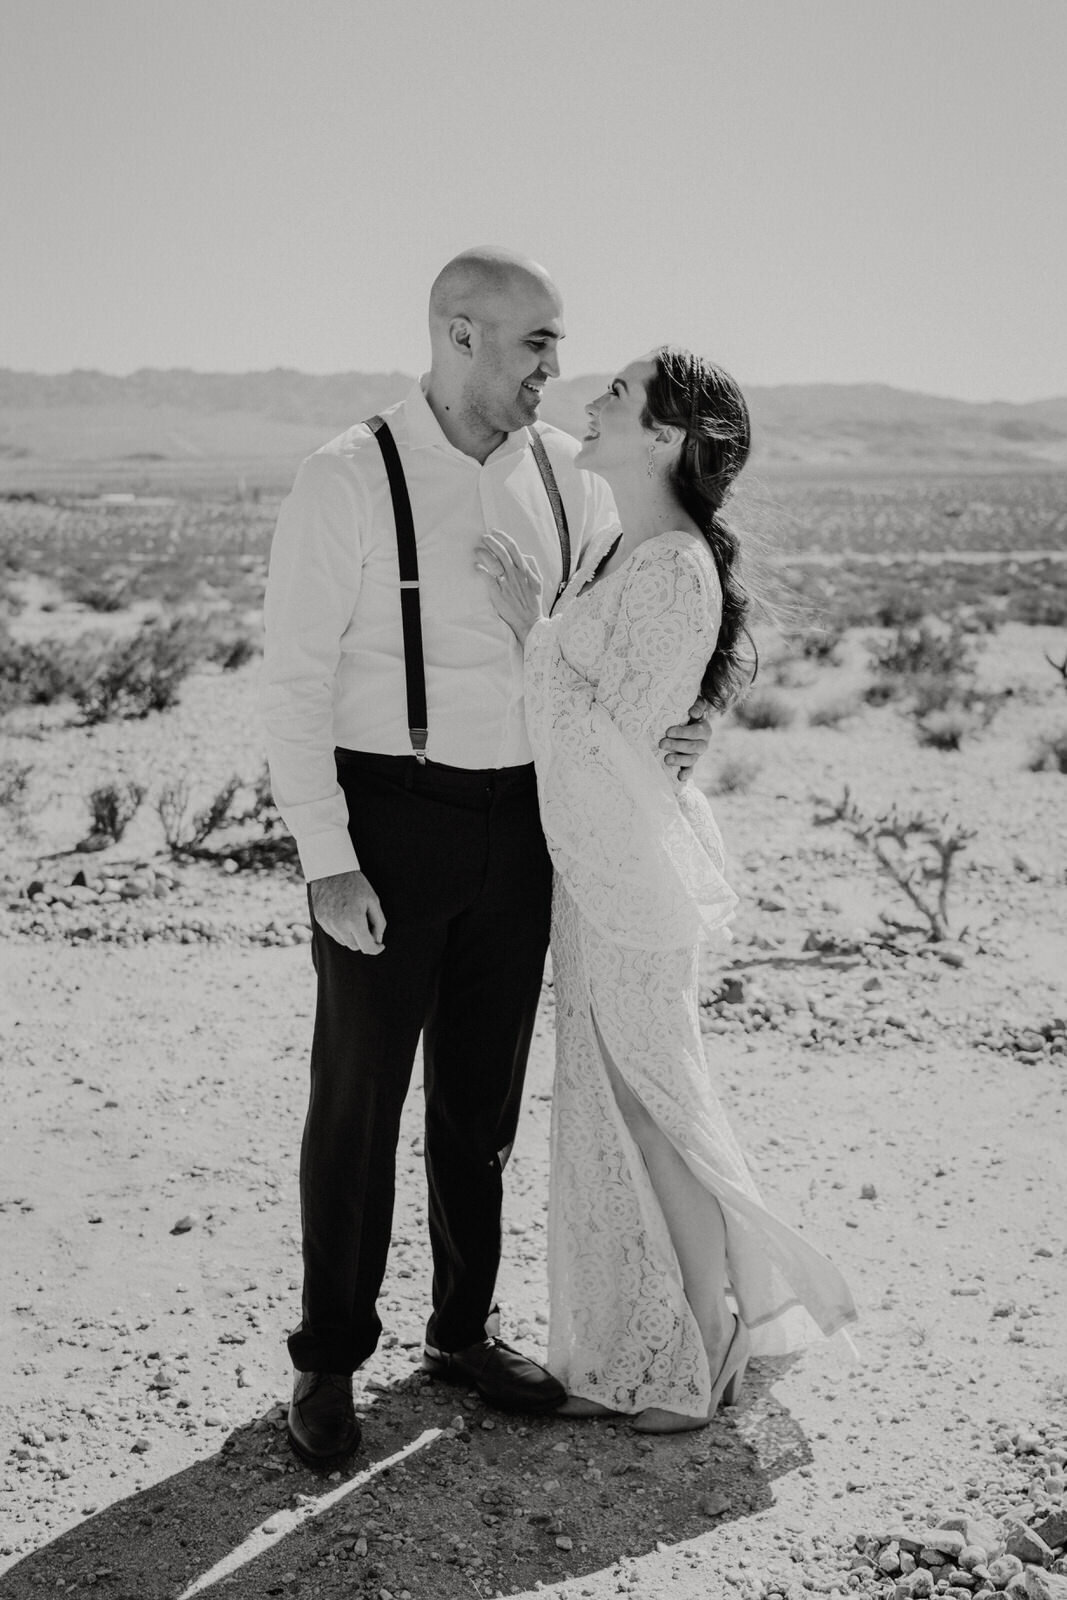 Bride and groom at Cactus Mountain Retreat before eloping in Joshua Tree | photo by Kept Record | www.keptrecord.com